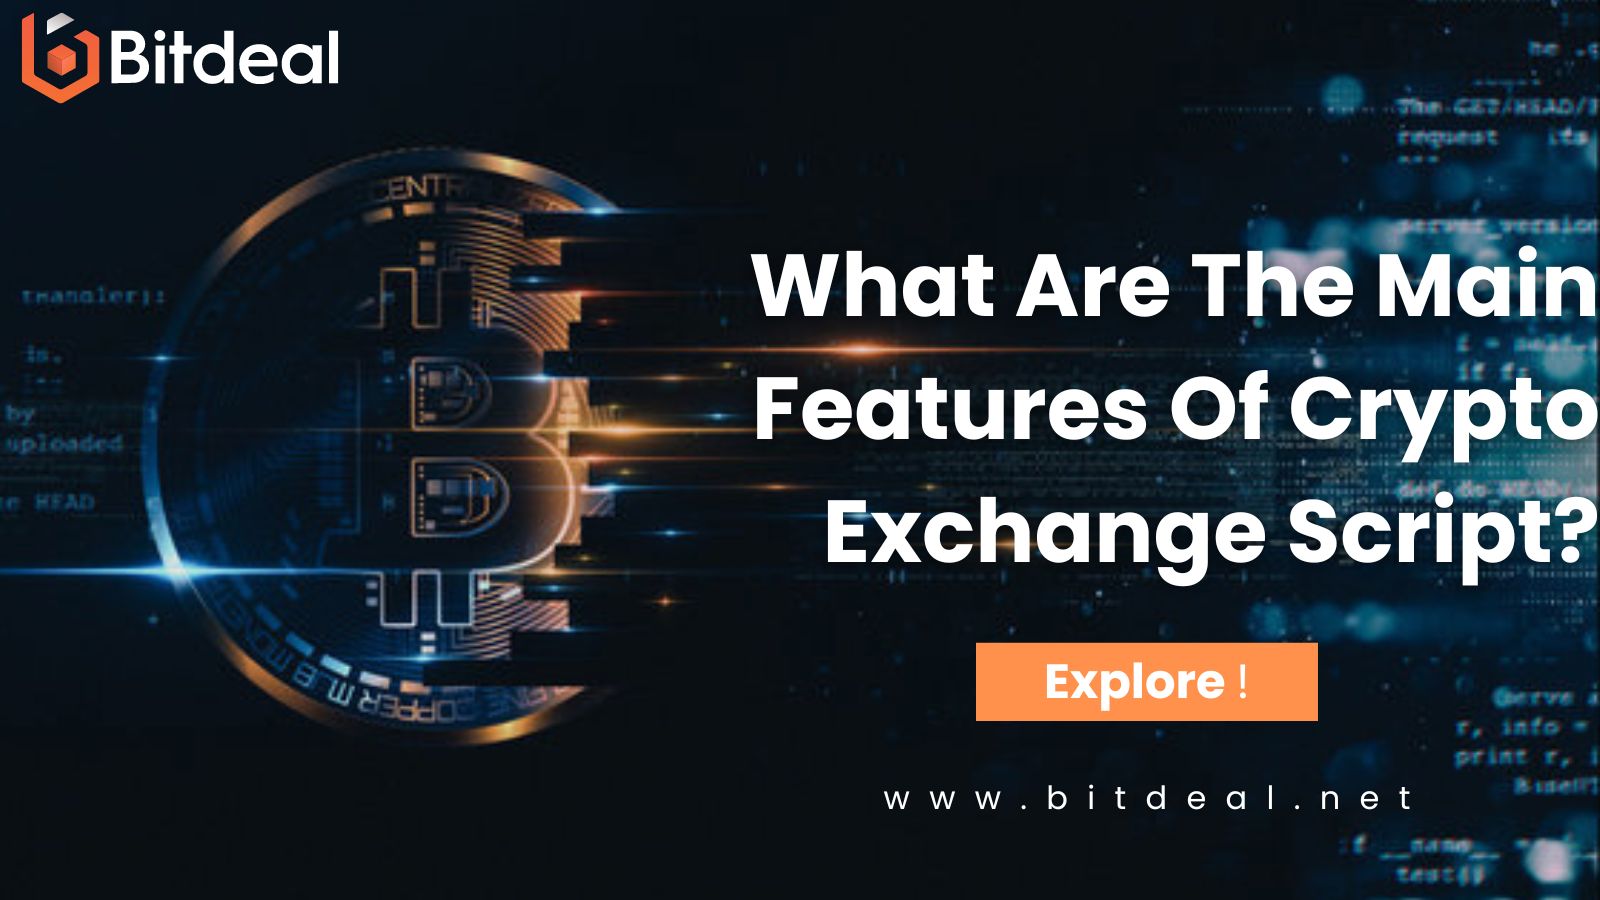 What Are The Main Features Of Crypto Exchange Script?